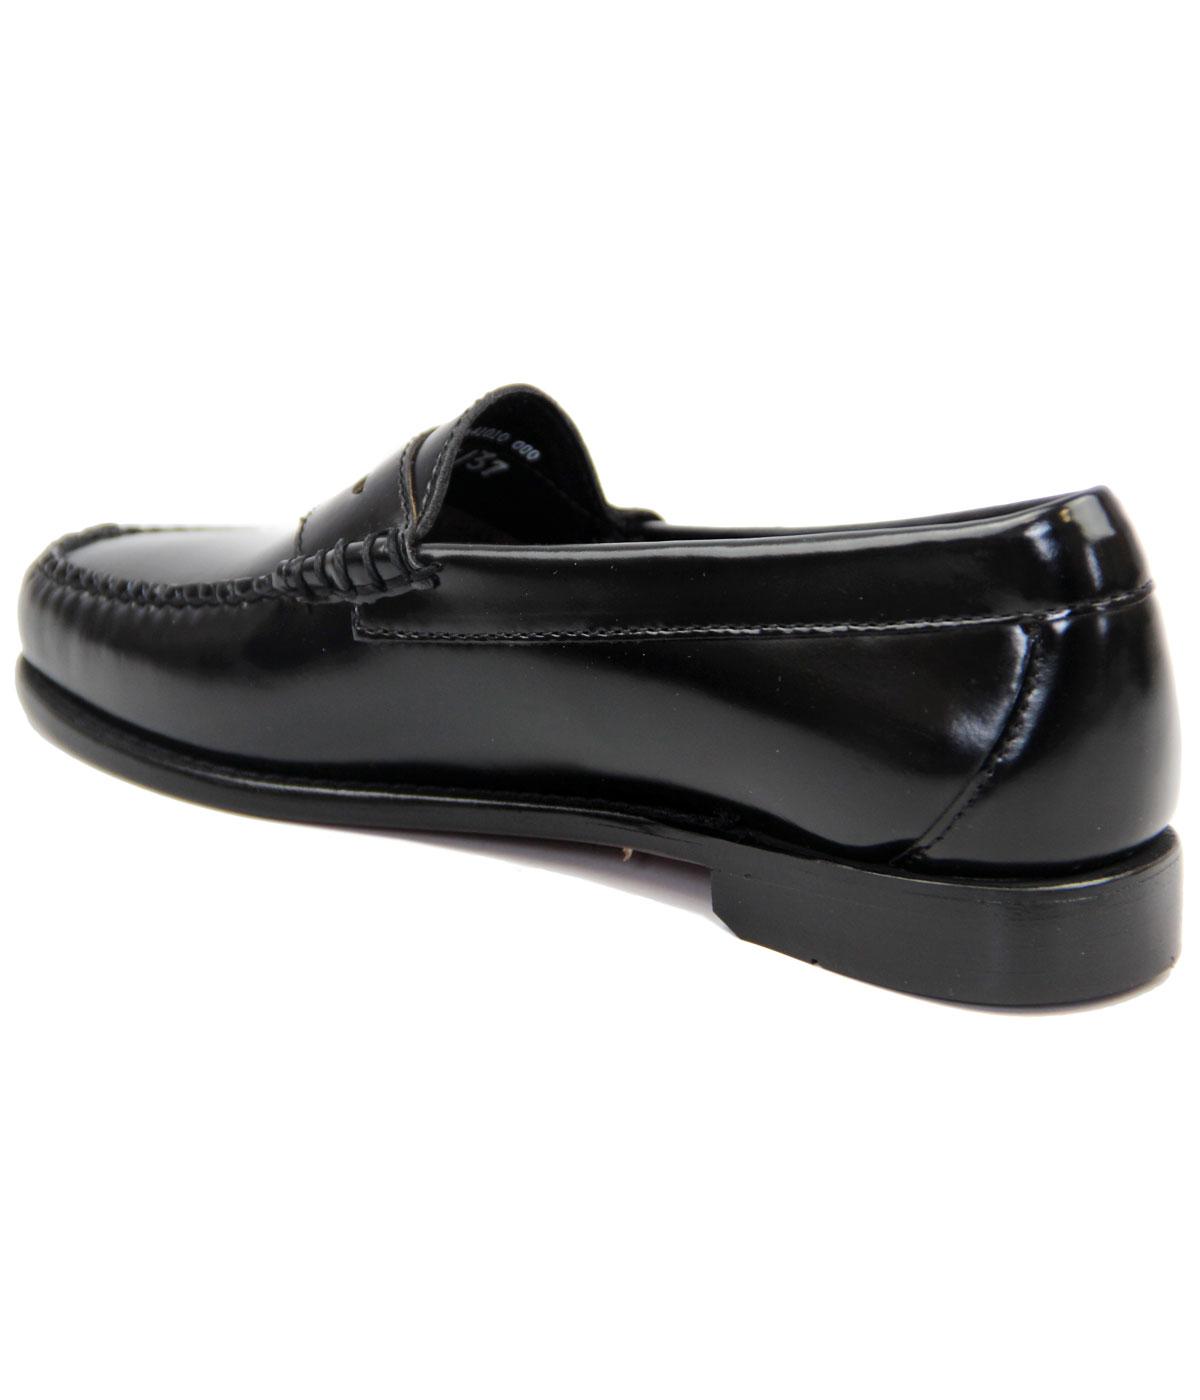 BASS WEEJUNS Womens Retro 60s Mod Black Leather Penny Loafers